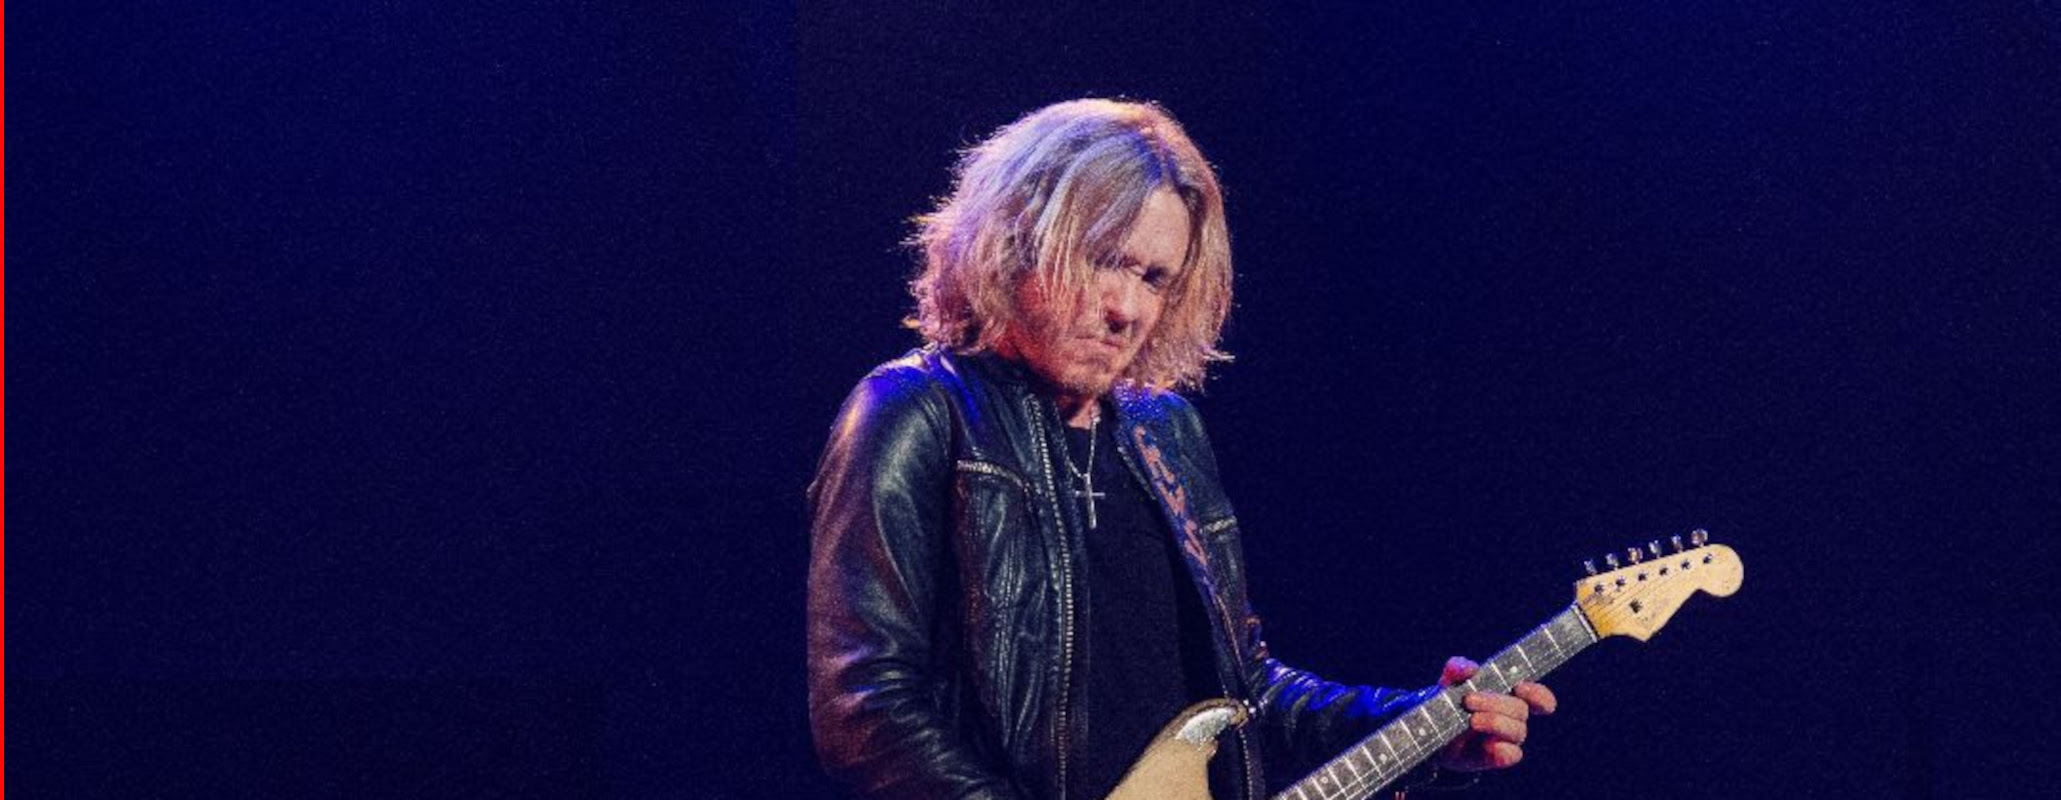 Kenny Wayne Shepherd Announces Tour Dates in Support of Upcoming Album, ‘Dirt On My Diamonds, Vol. 1’